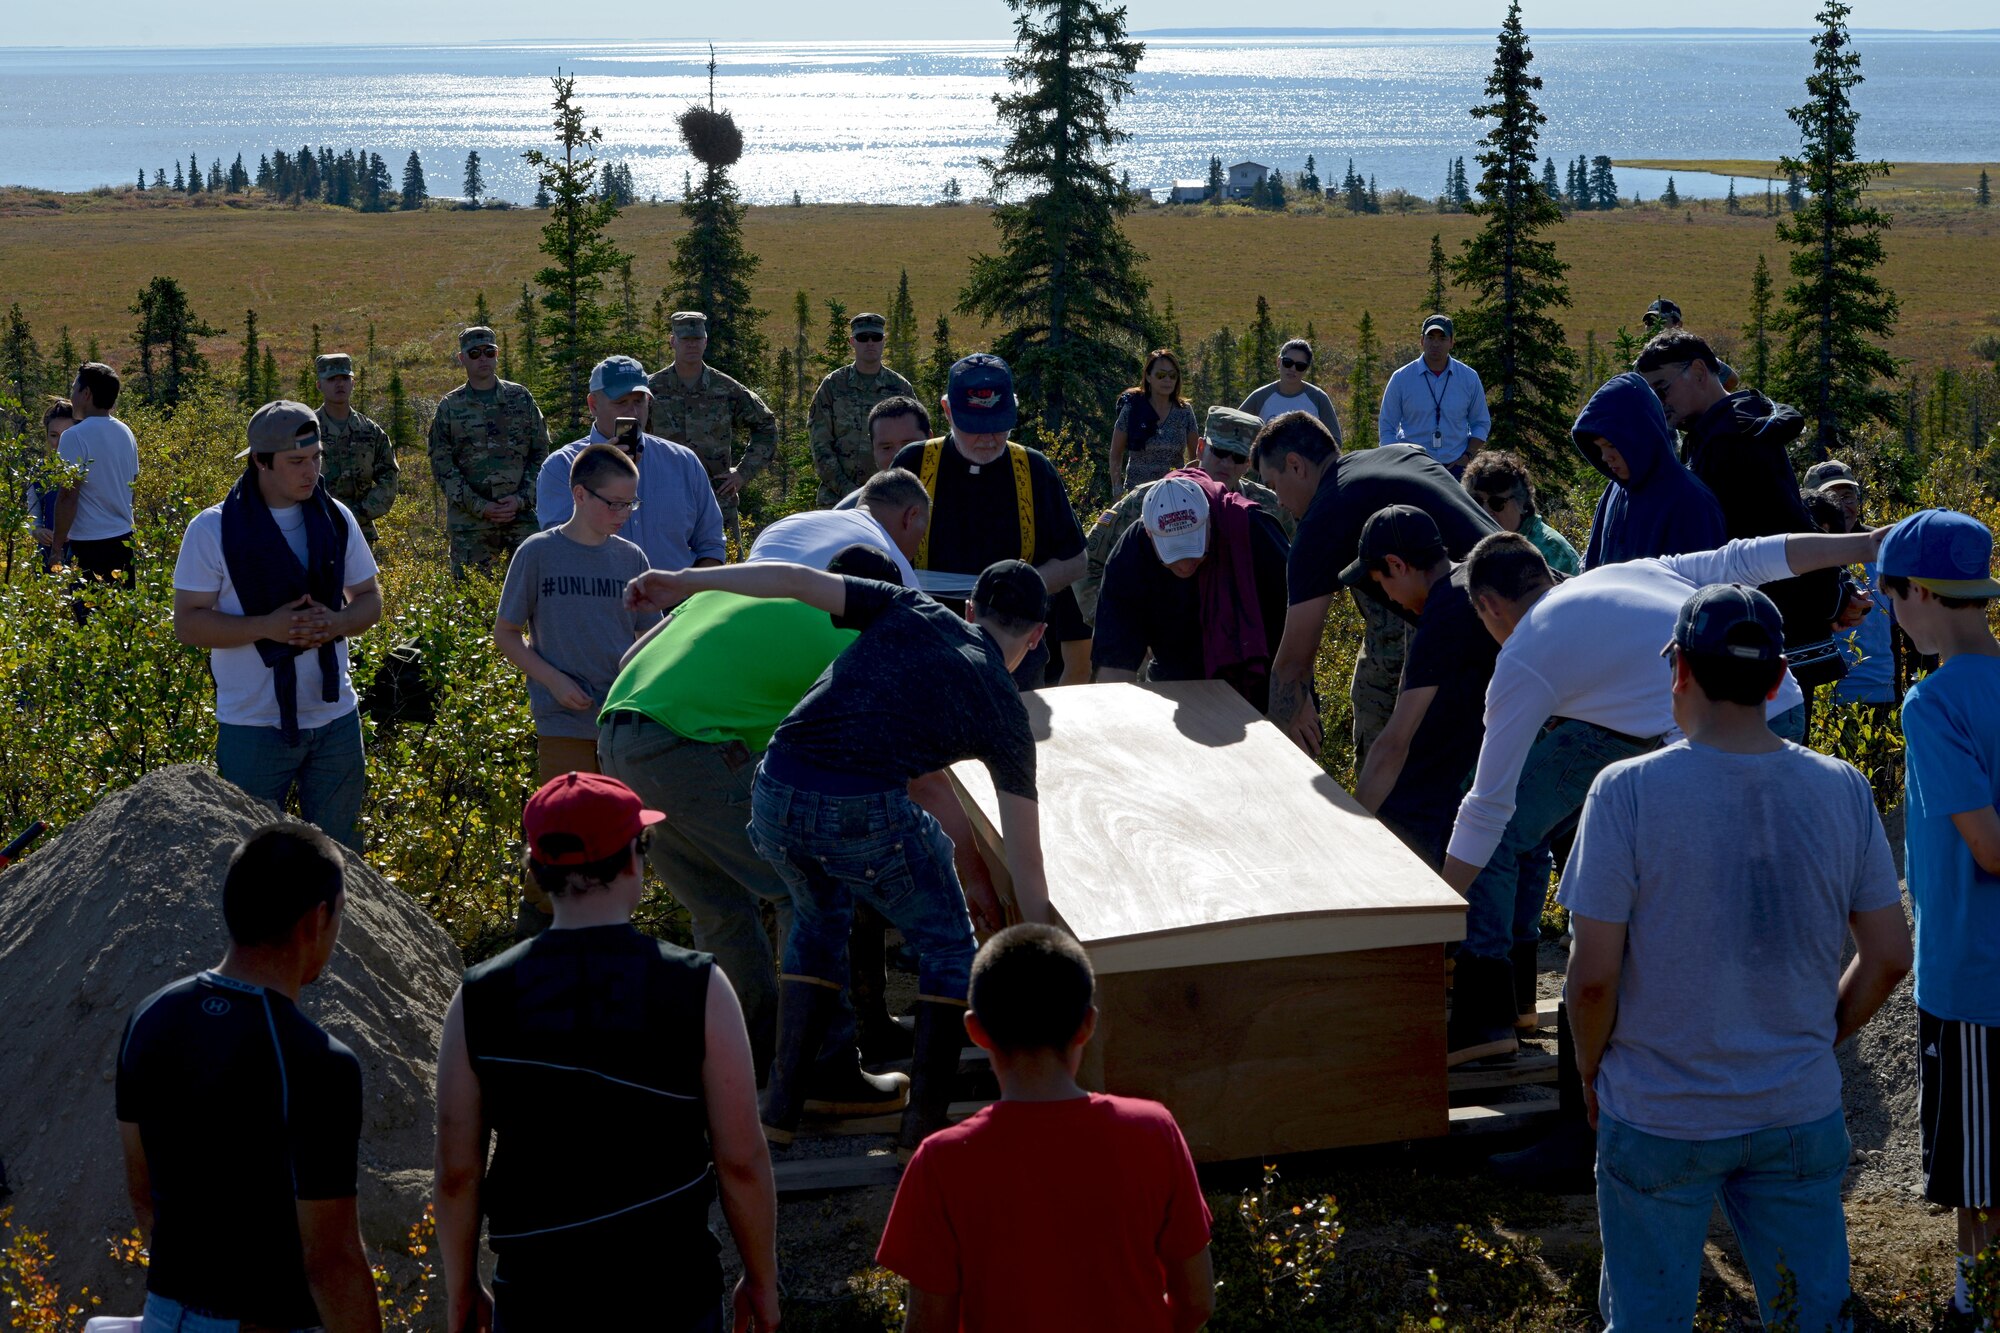 Former Alaska National Guard adjutant general Maj. Gen. John Schaeffer Jr, is carried to his final resting place at Ivik, Alaska, August 31, 2016. Schaeffer enlisted in the Alaska National Guard in 1957, and served for 34 years.  Schaeffer was the first Alaska Native two-star general of the Alaska National Guard and commissioner of the Alaska Department of Military and Veterans Affairs. He is survived by Mary his wife of 56 years. (U.S. Air Force photo by Airman 1st Class Javier Alvarez)